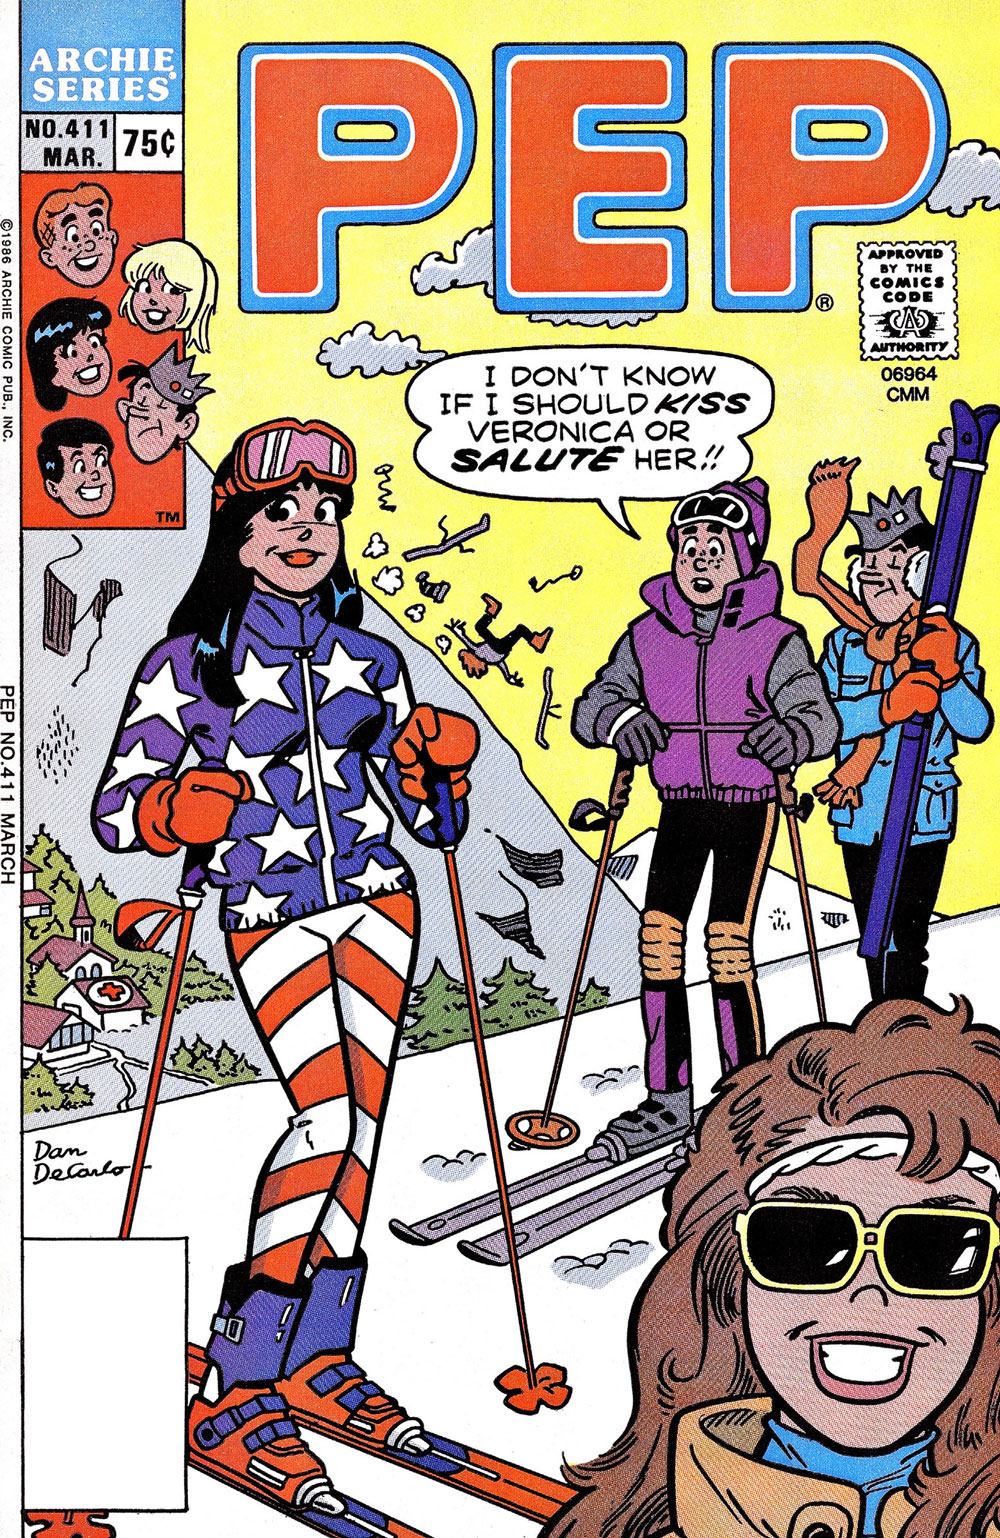 Veronica, Archie, and Jughead are skiing. Veronica wears an American flag-design snow suit. Archie says he doesn't know if he should kiss her or salute her. Someone unknown falls down the ski slope in the background. 